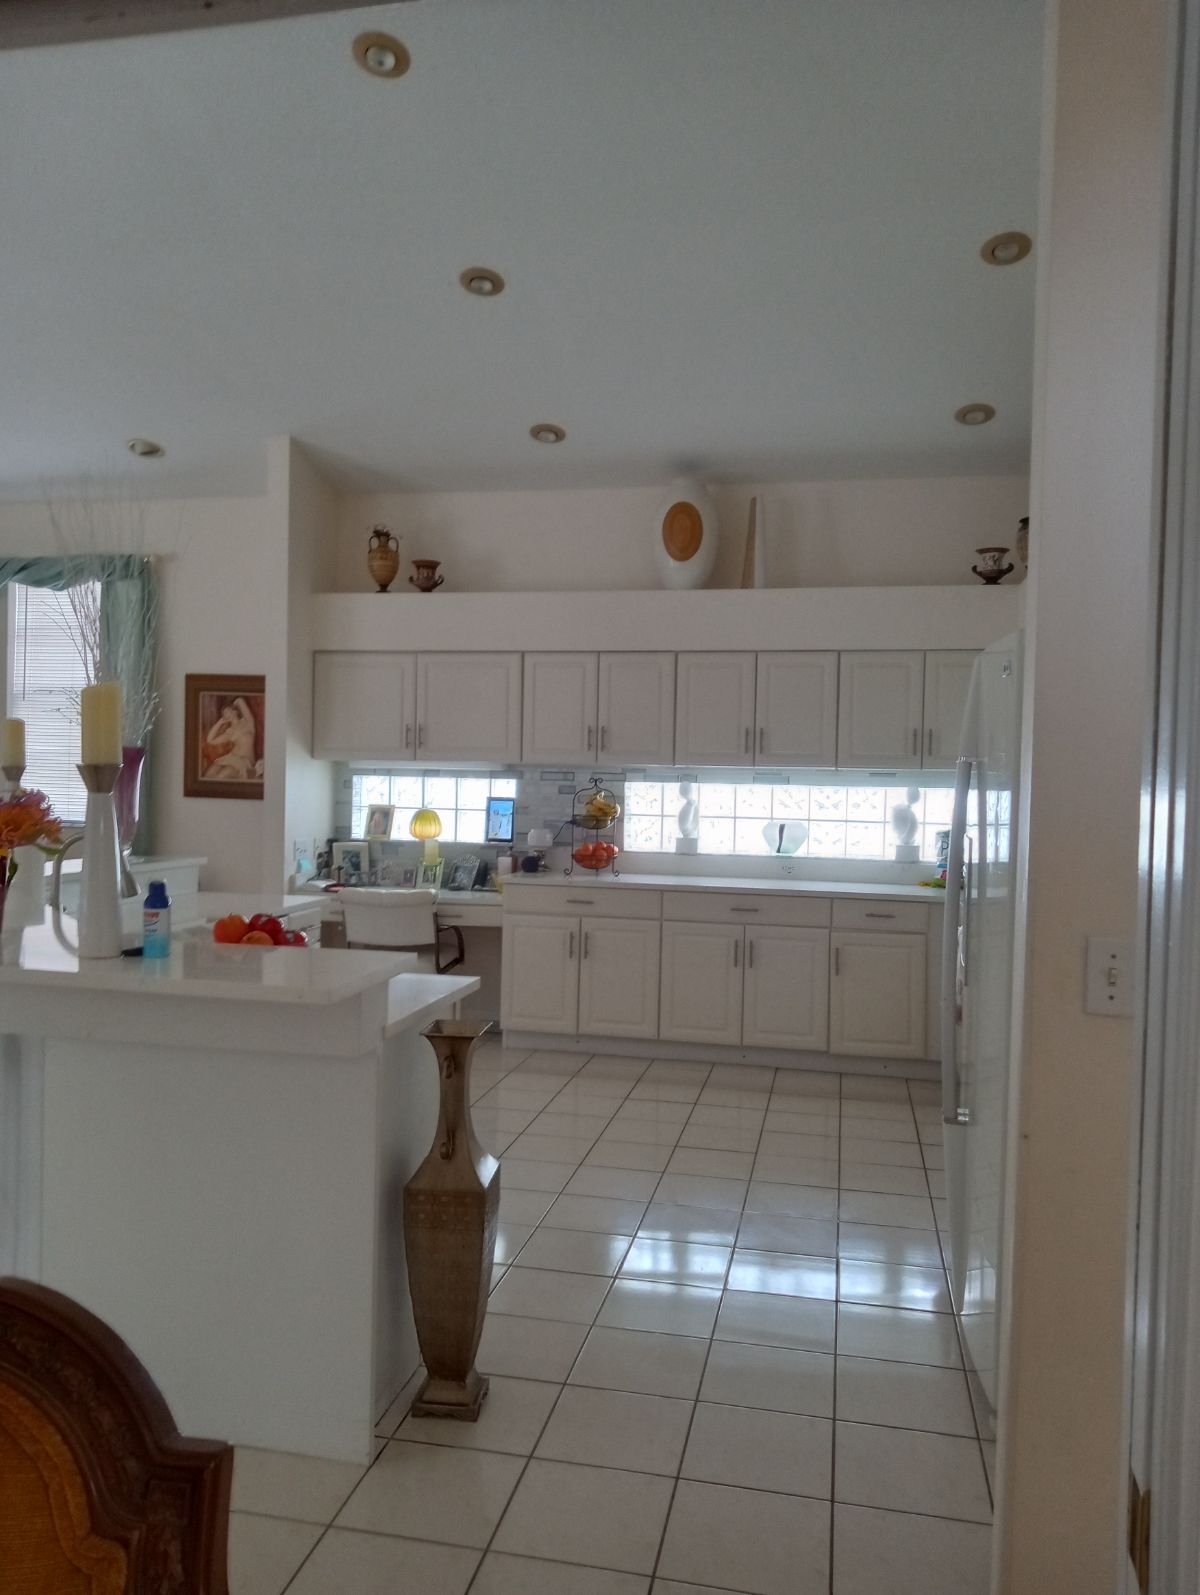 Experienced cleaning team from a local Tarpon Springs cleaning company ensuring a spotless kitchen